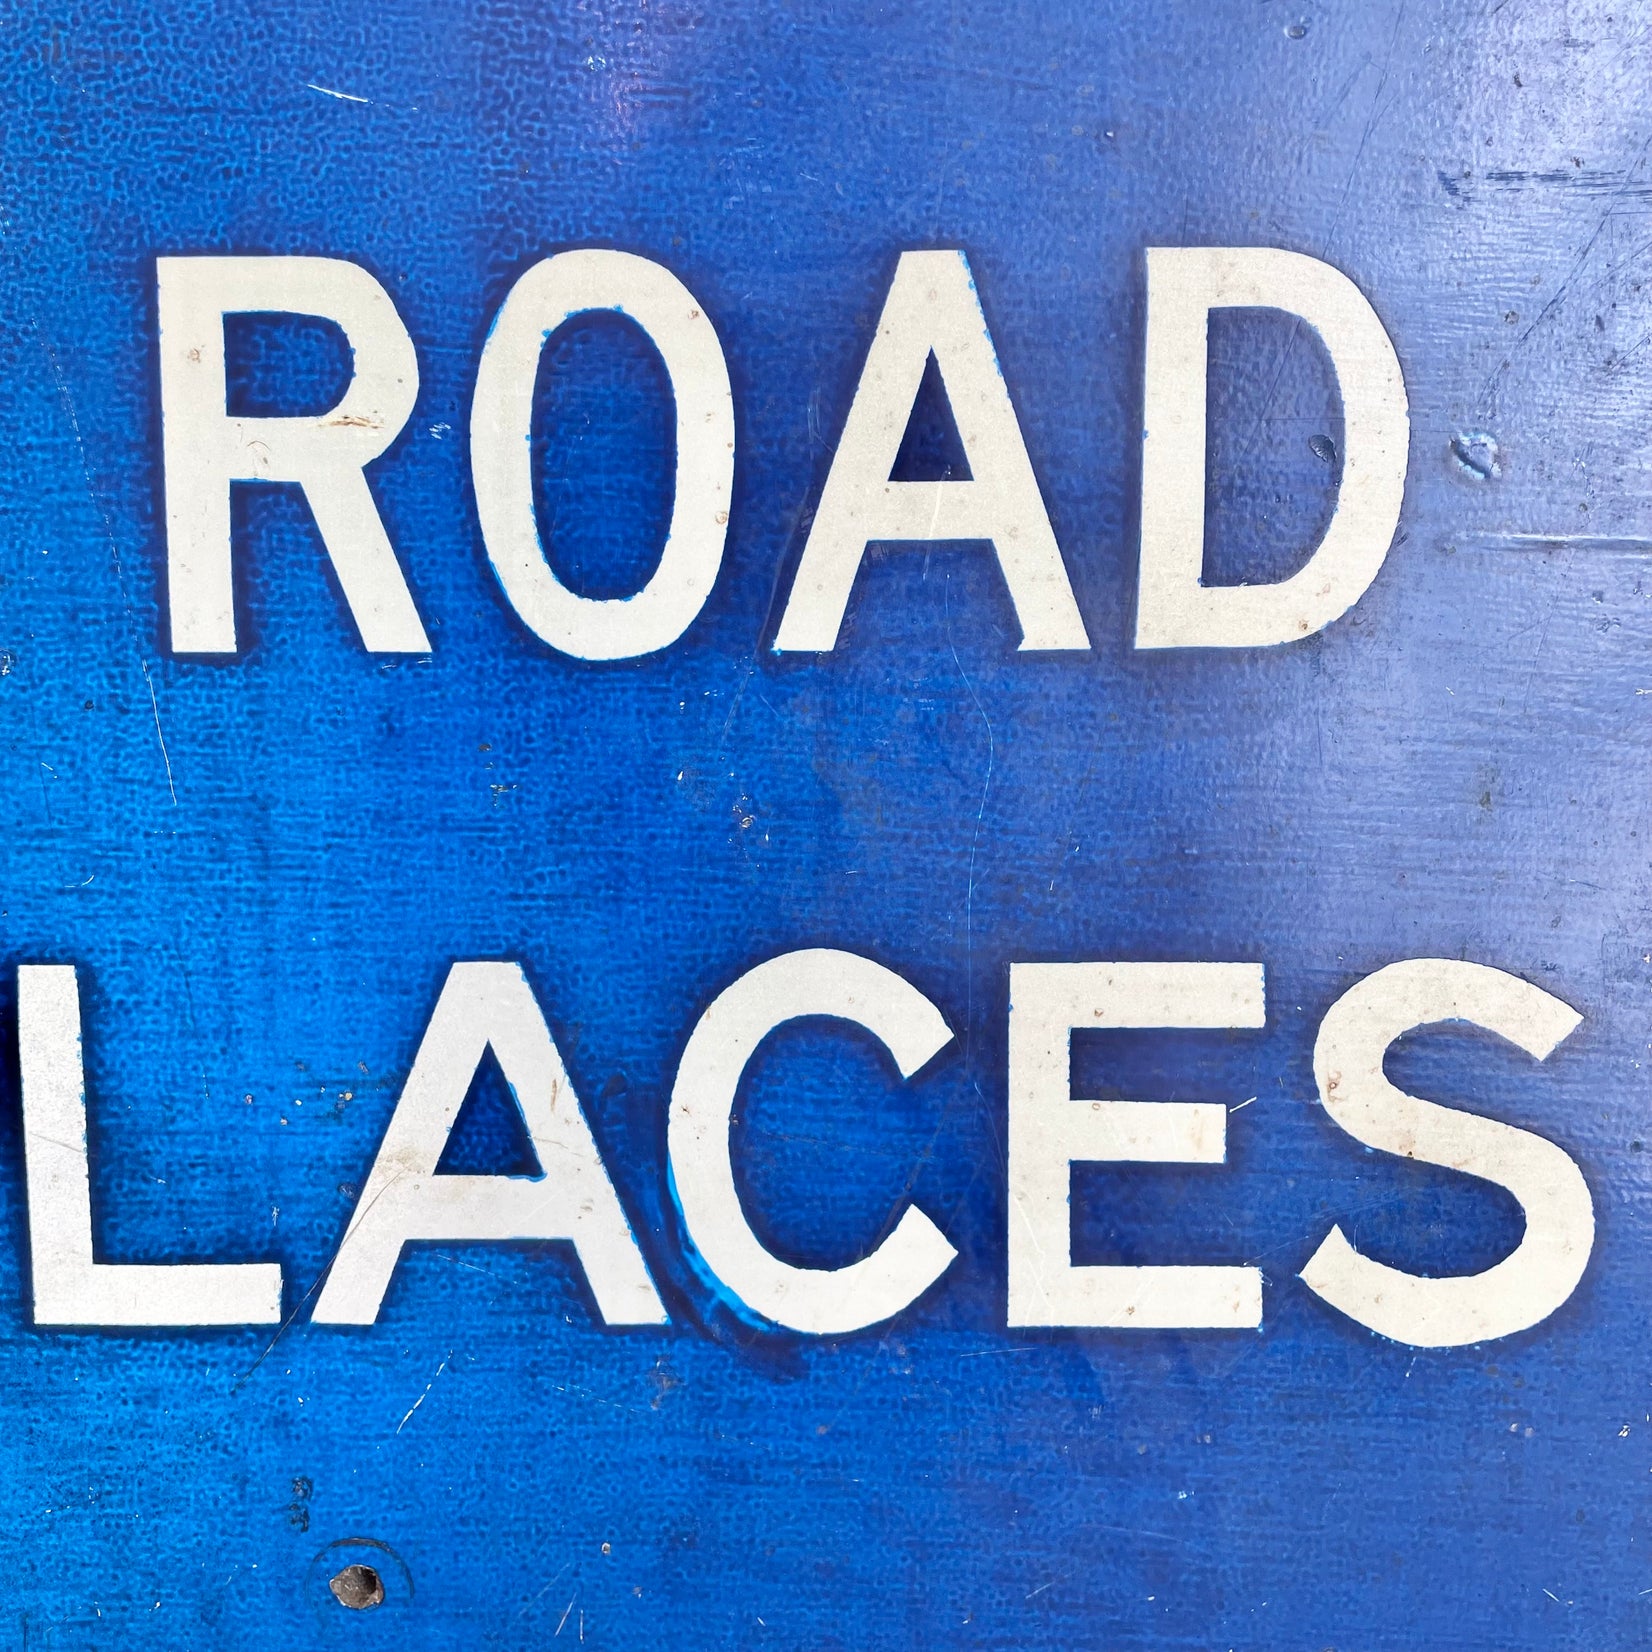 Hand Painted 'ICE ON ROAD IN PLACES' Wooden Sign